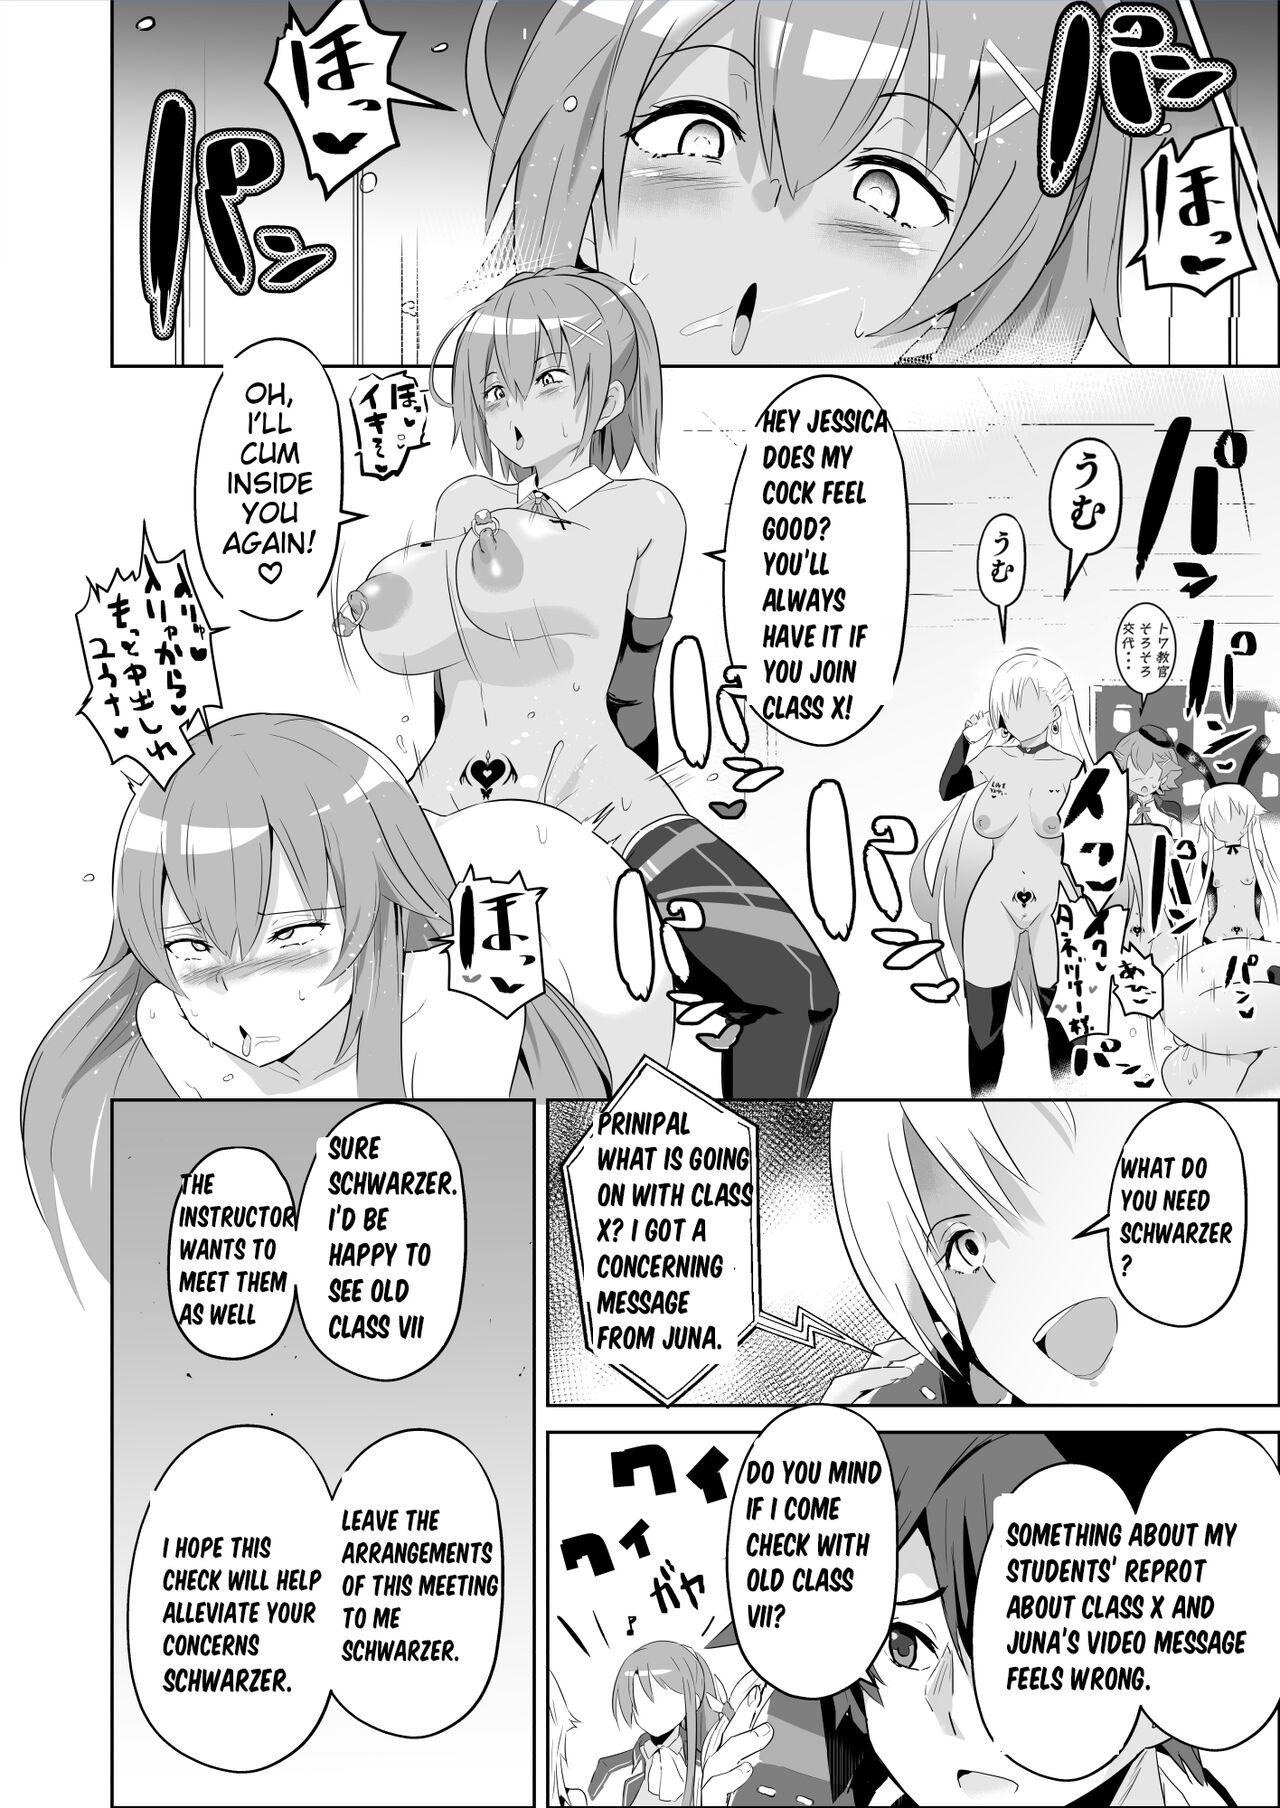 Hot Girl Fucking Hypnosis of the New Class VII - Aftermath - The legend of heroes | eiyuu densetsu Hot Girl Fucking - Page 2